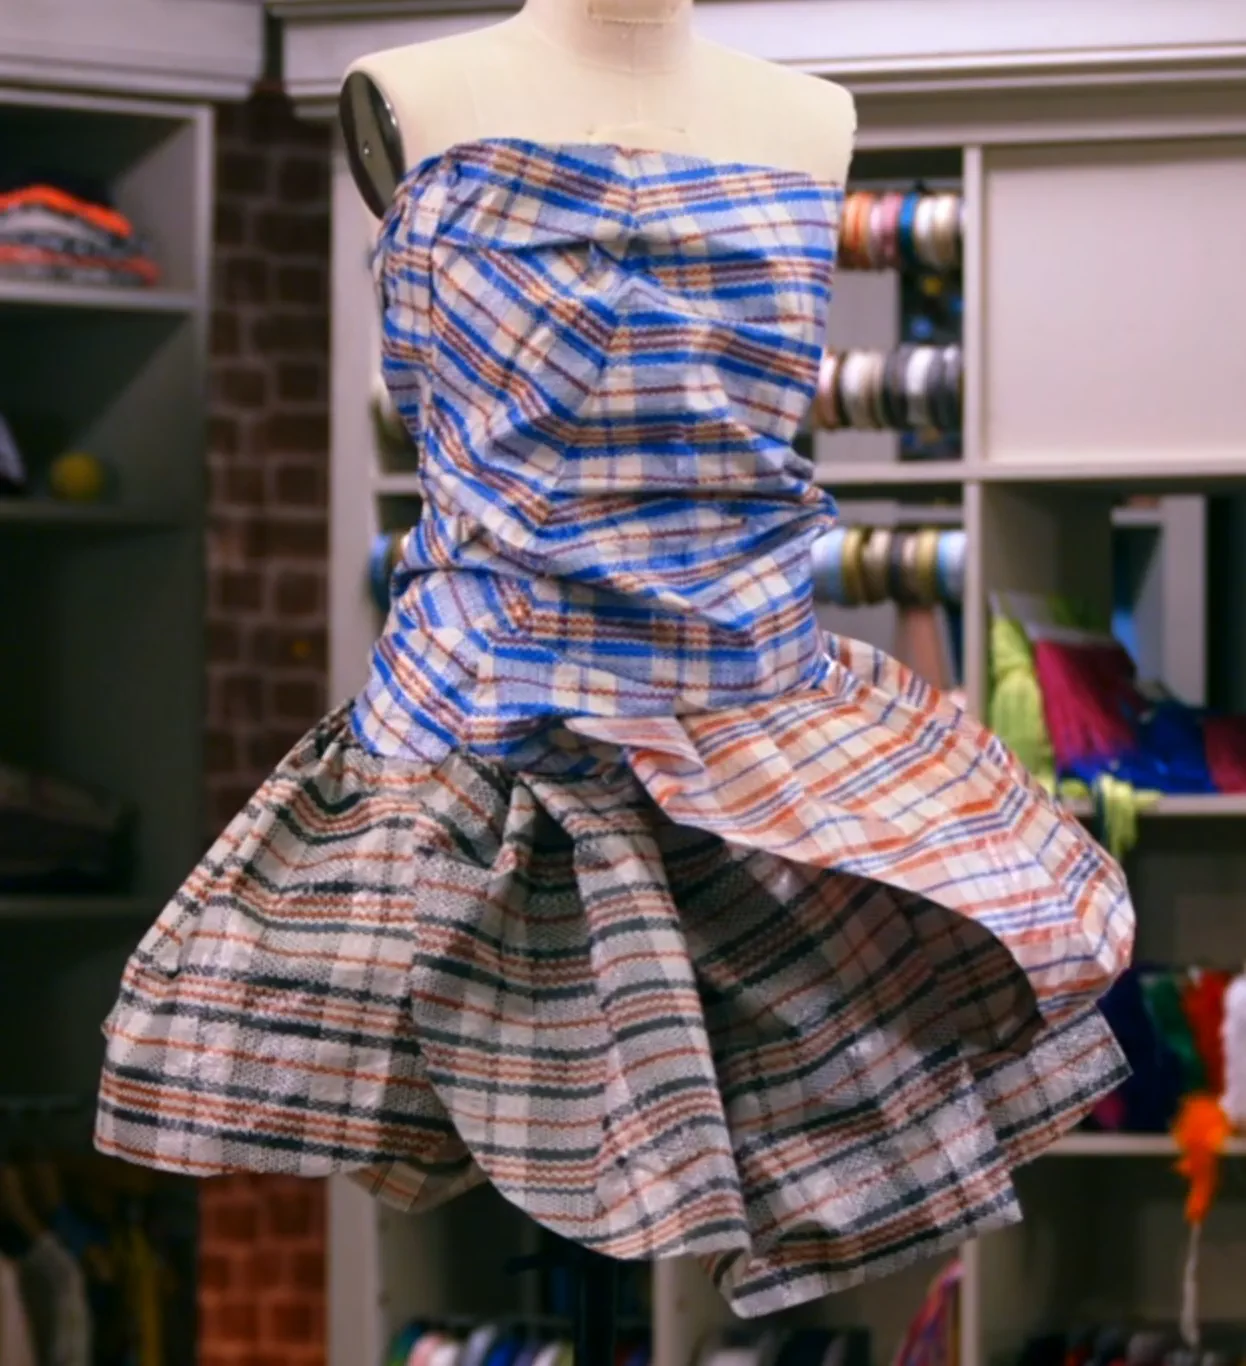 Dress made from upcycled plastic laundry bags